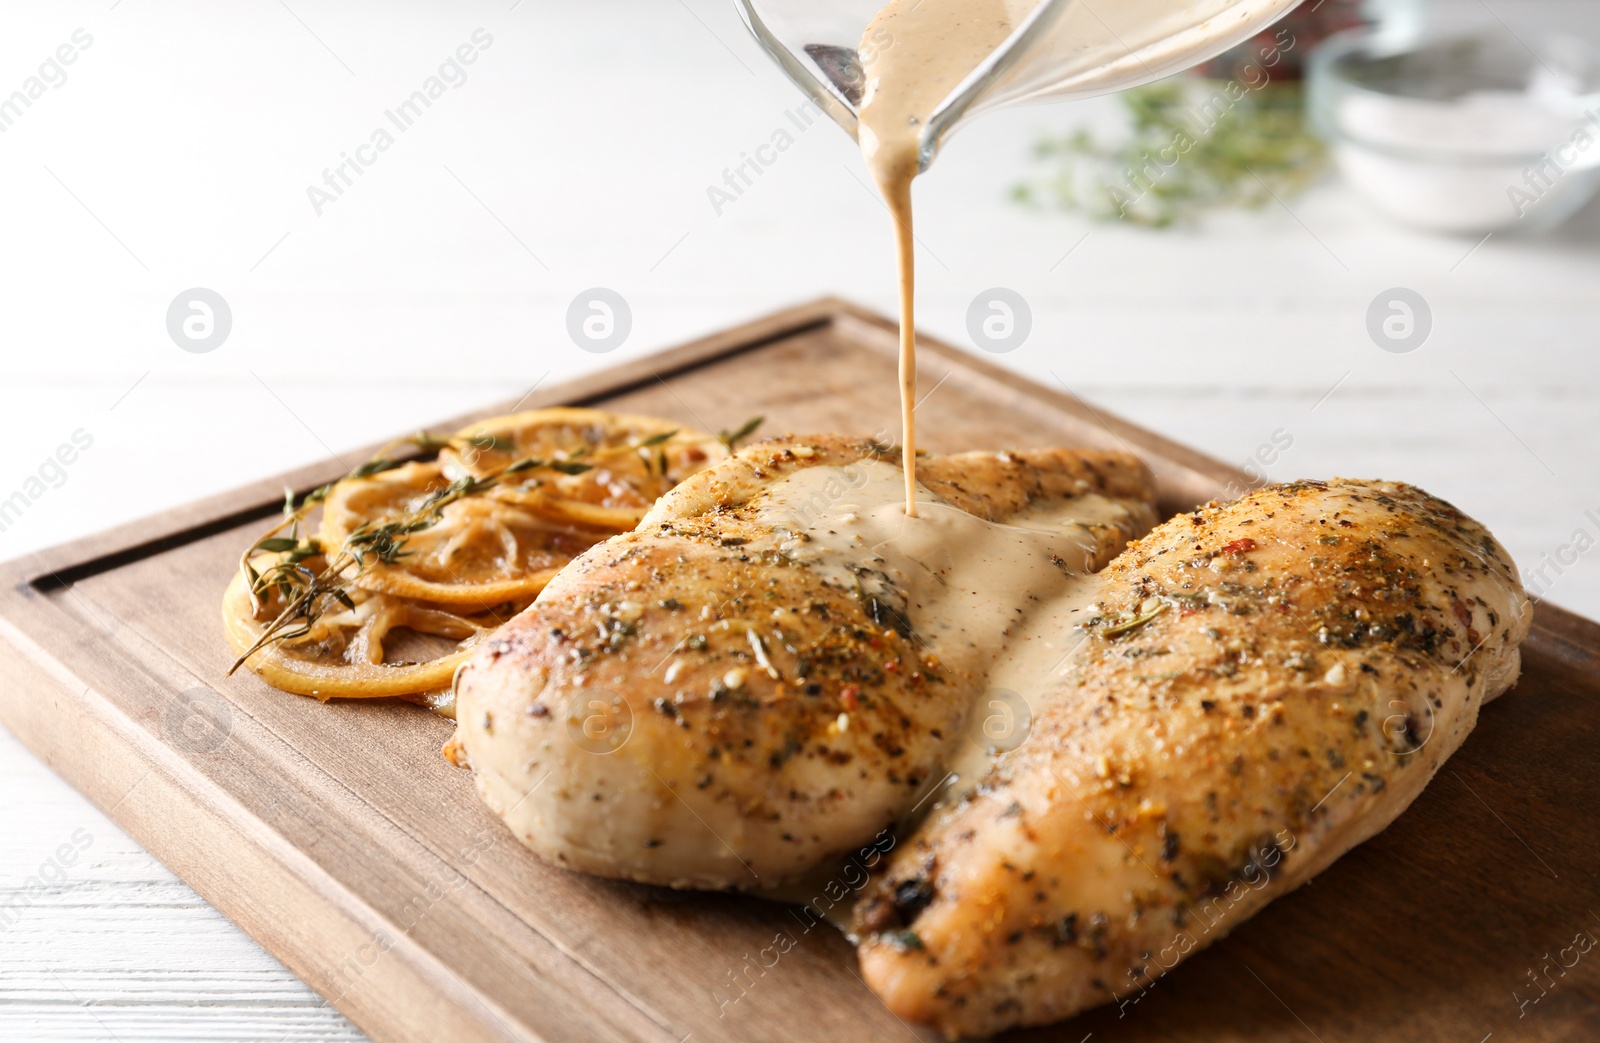 Photo of Pouring sauce onto baked lemon chicken on white wooden table